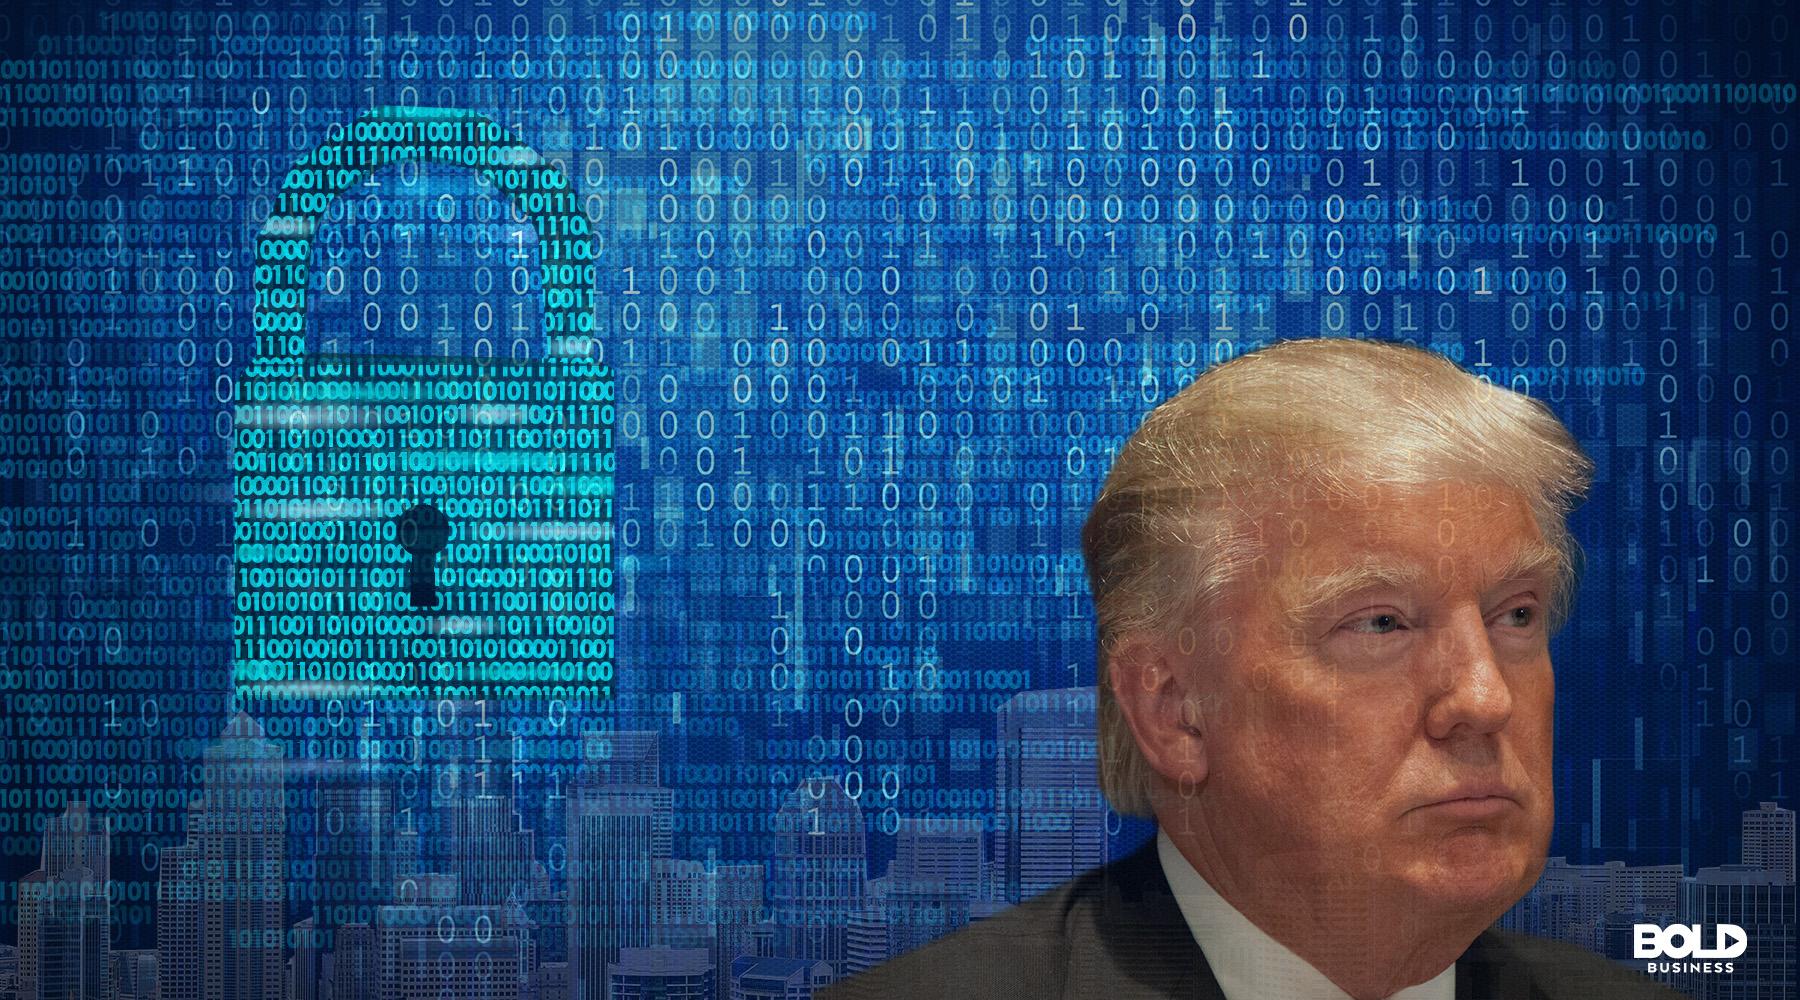 The Trump Cybersecurity Policy and Its Impact on Citizens and National Matters